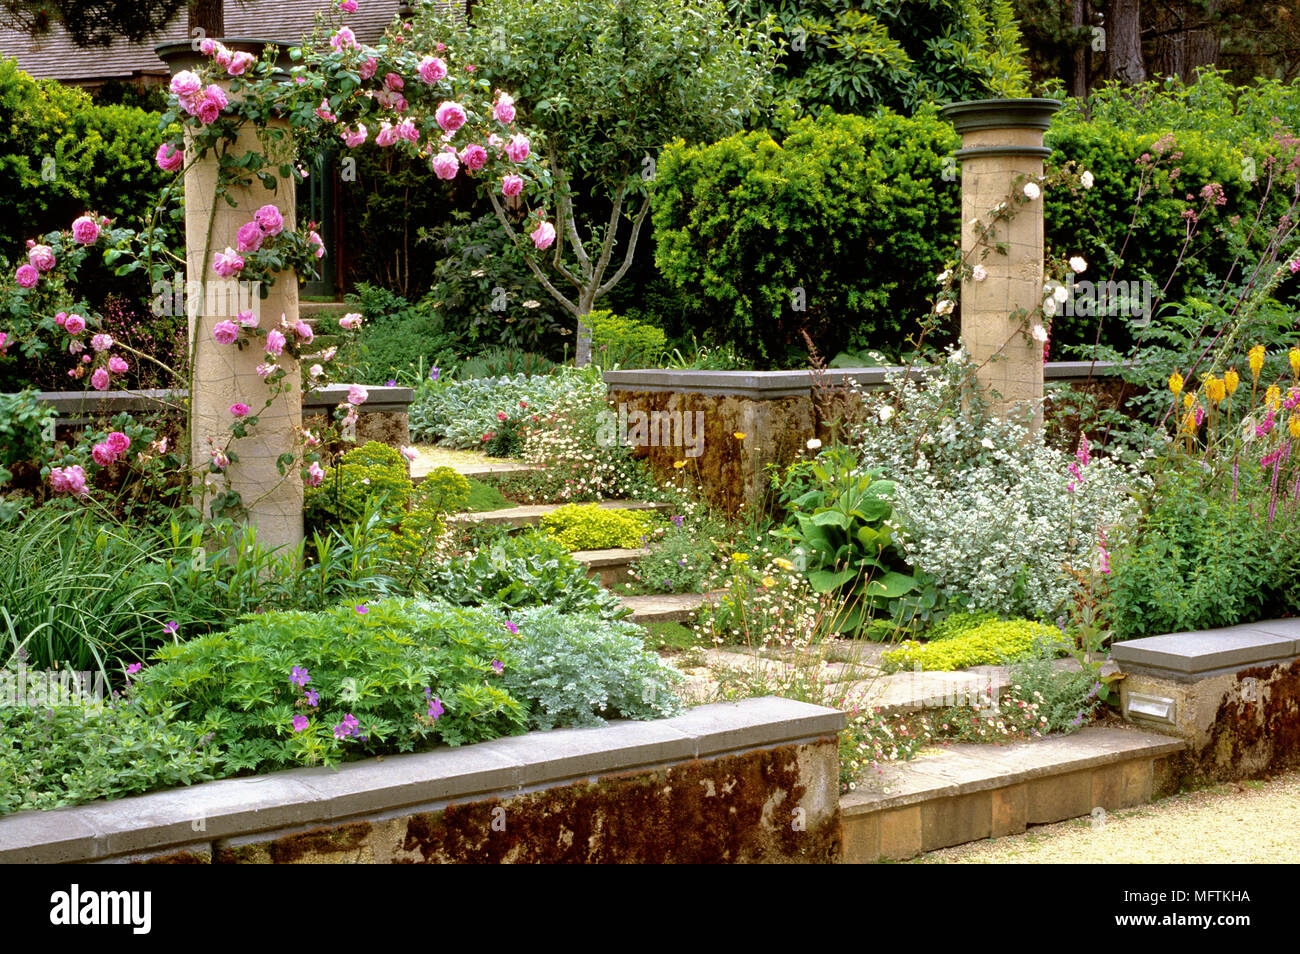 Garden with planting of Rosa 'Bourbon Queen', Geranium, Digitalis, Taxus, another Rosa, Erigeron karvinskianus, Thymus and Kniphofia 'Bee's Sunset' Stock Photo